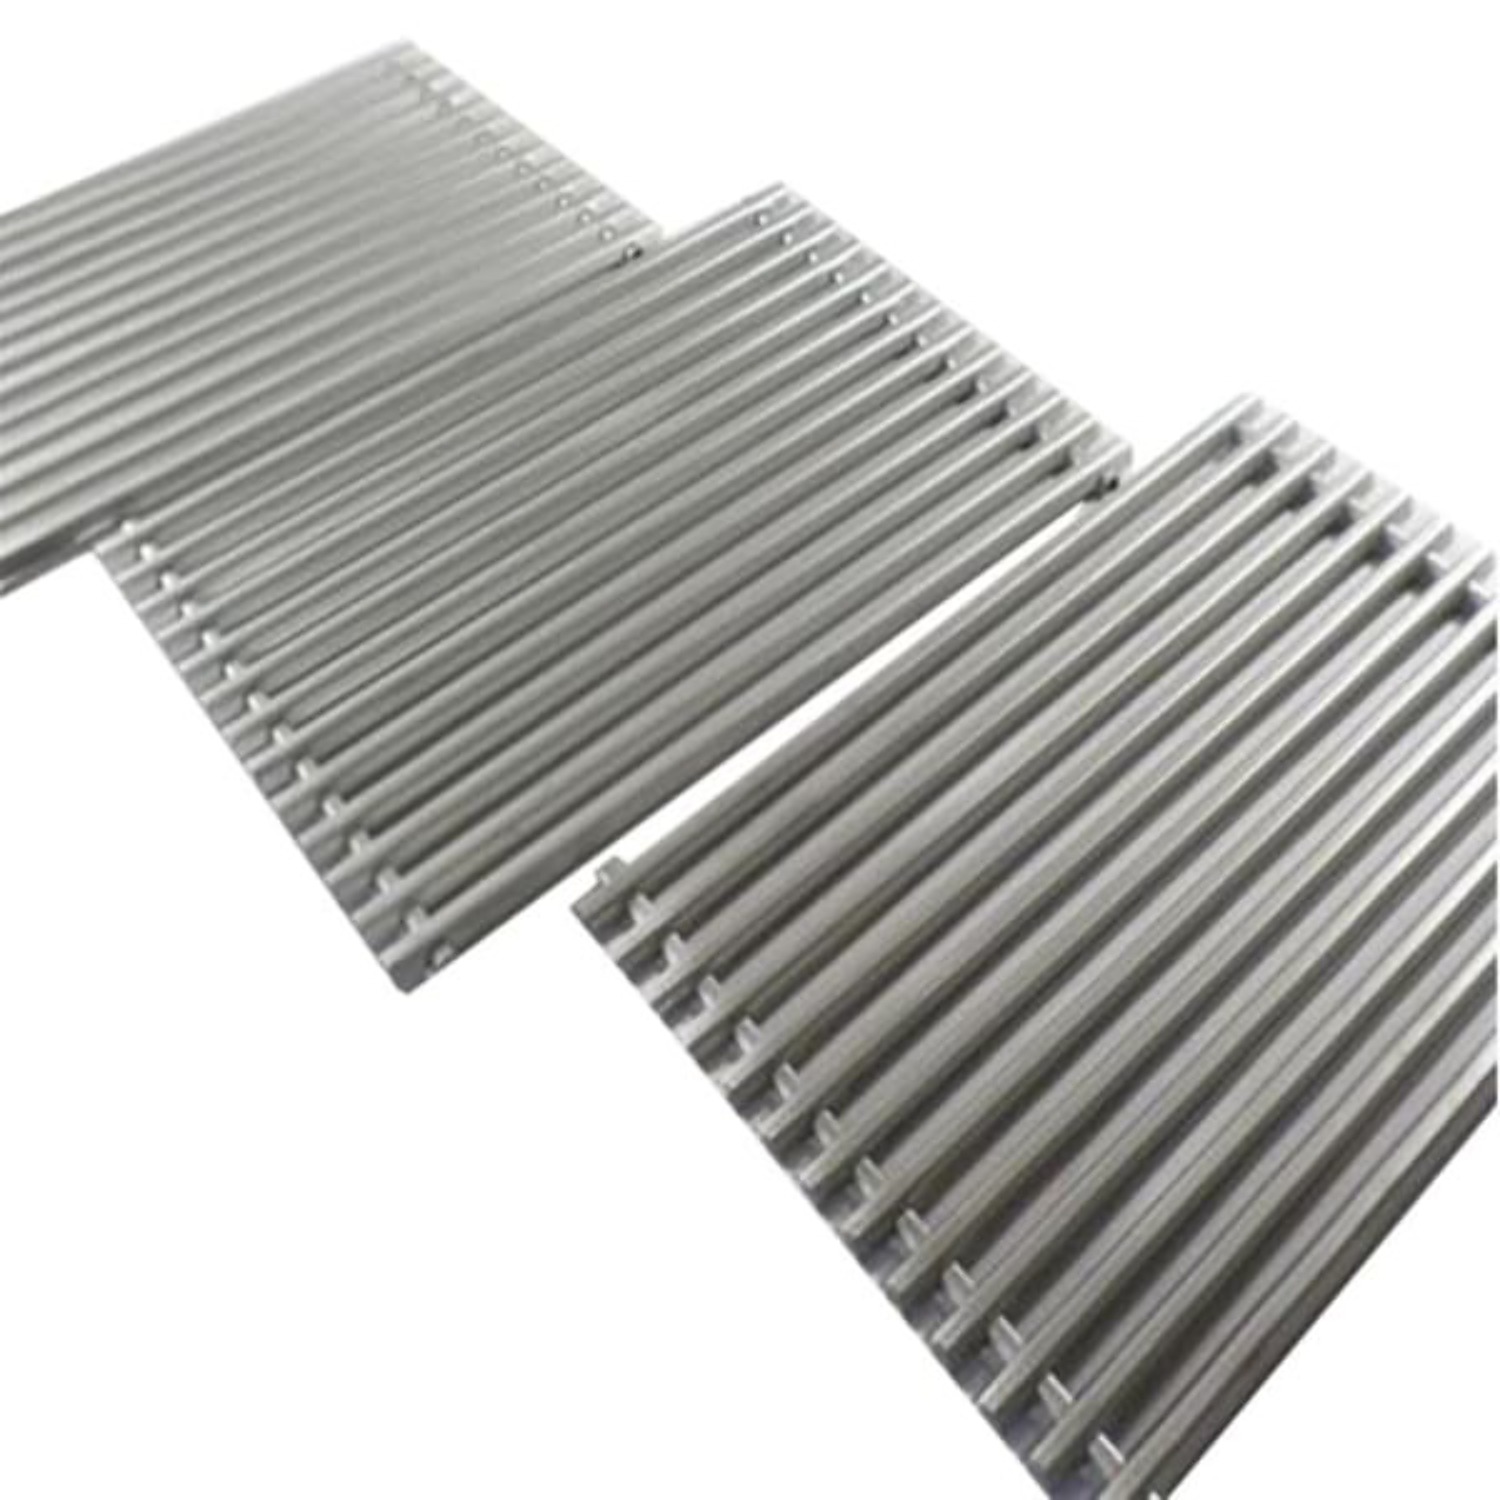 BBQ Grill Compatible With Weber Grills 3 Piece SS Grates 17-1/4 x 35-1/4 BCP85312 - image 3 of 4